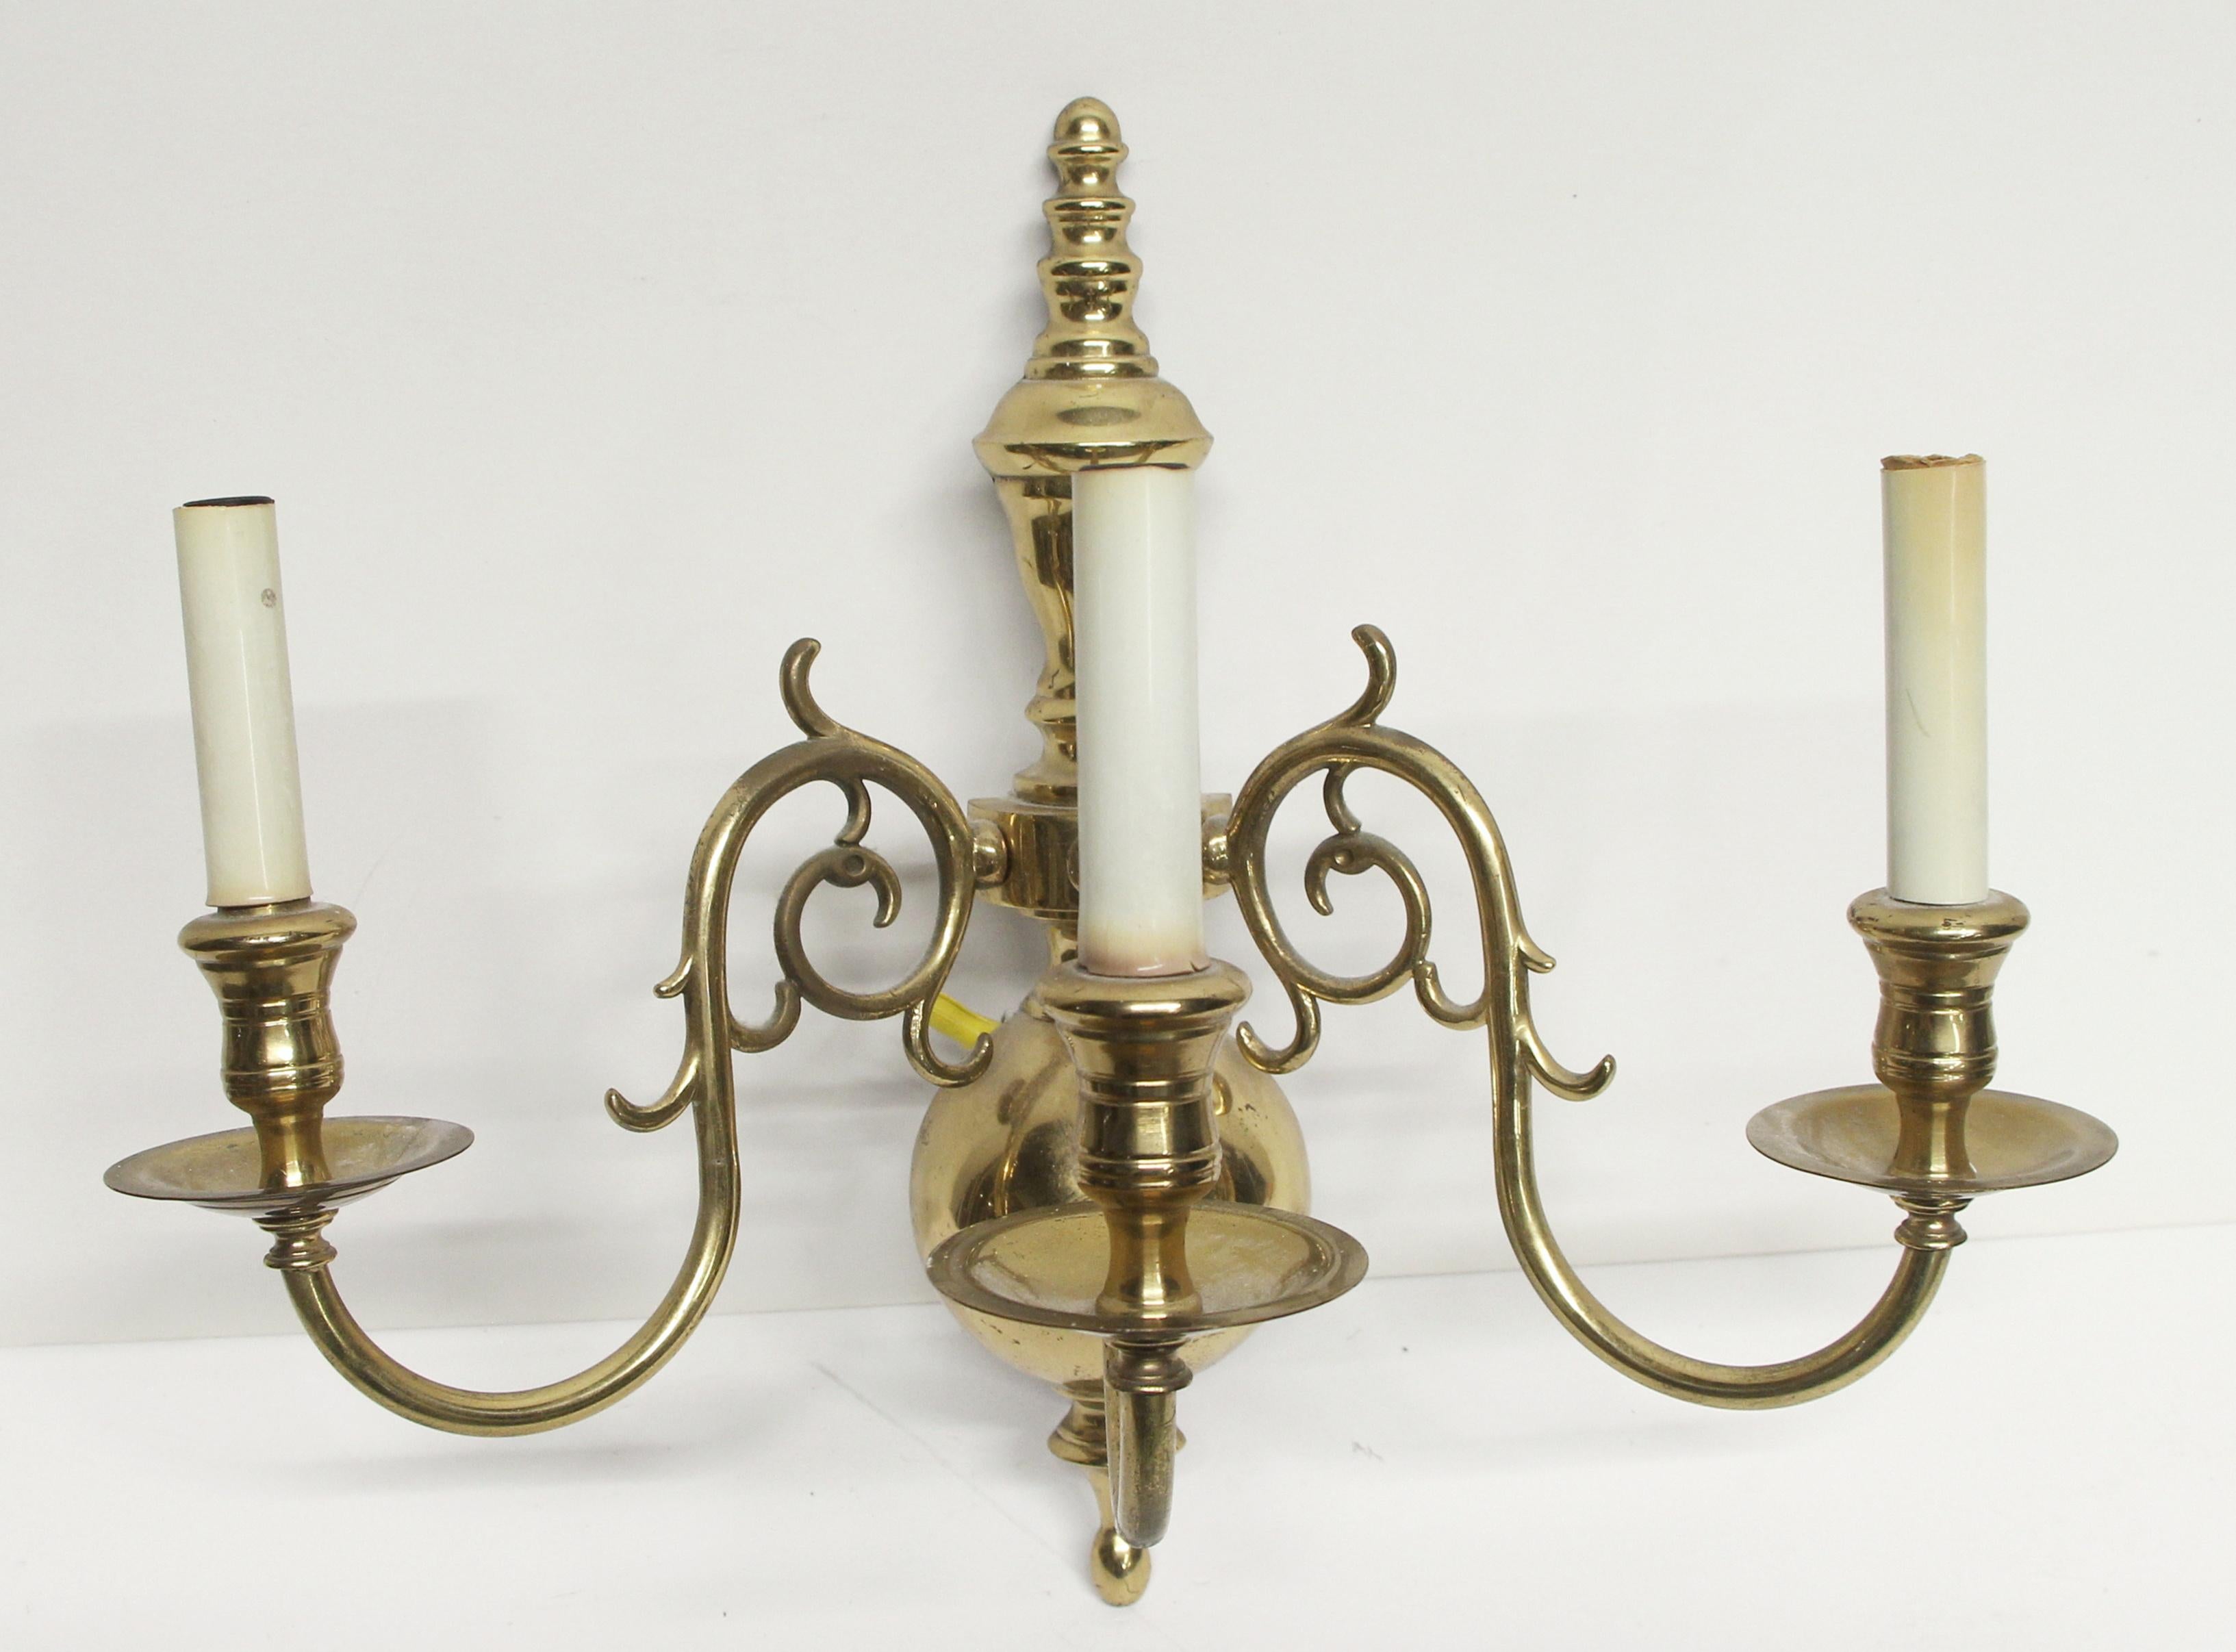 From the 1980s, NYC Waldorf Astoria Hotel. Three candlestick arm brass colonial style scones with a polished finish. Priced as pair. A Waldorf Astoria authenticity card included with your purchase. This can be seen at our 400 Gilligan St location in